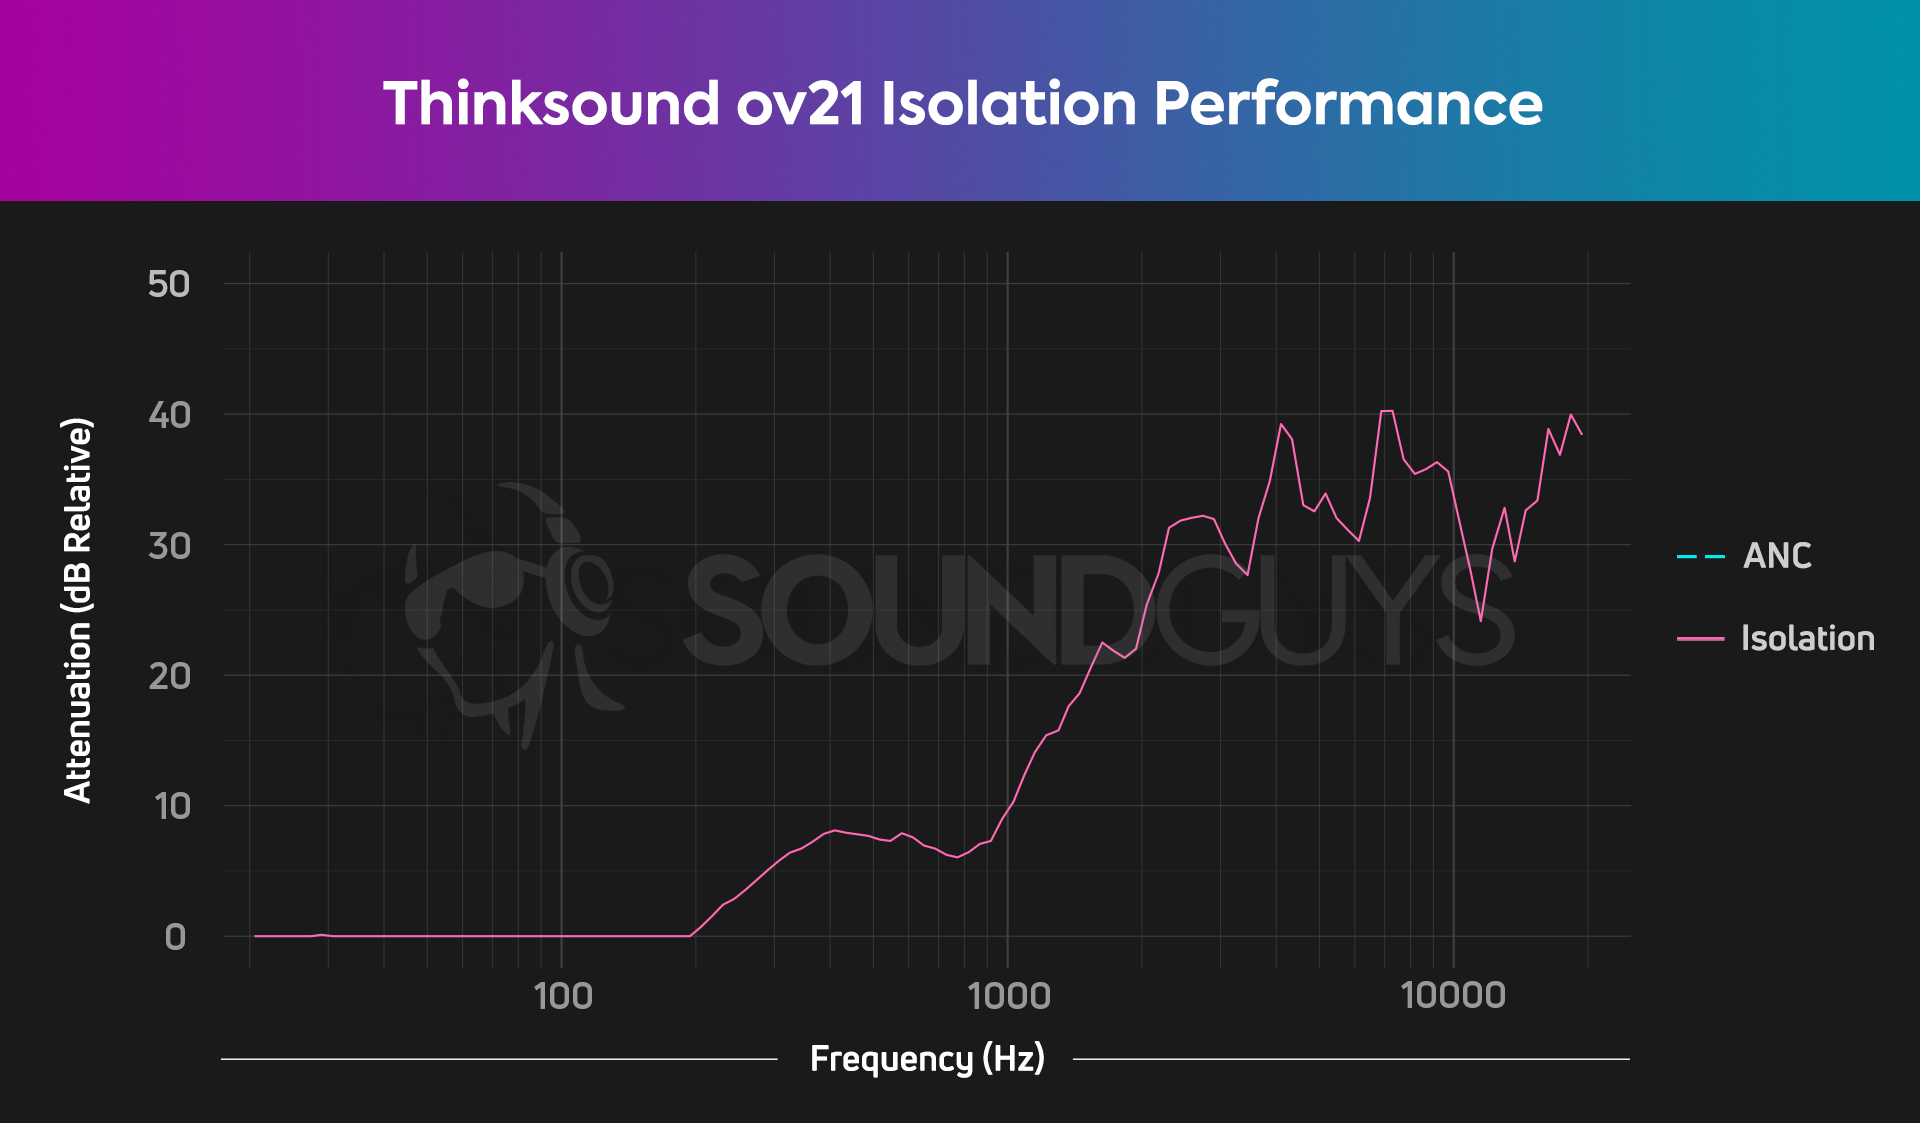 A chart shows the isolation attenuation performance of the Thinksound ov21.